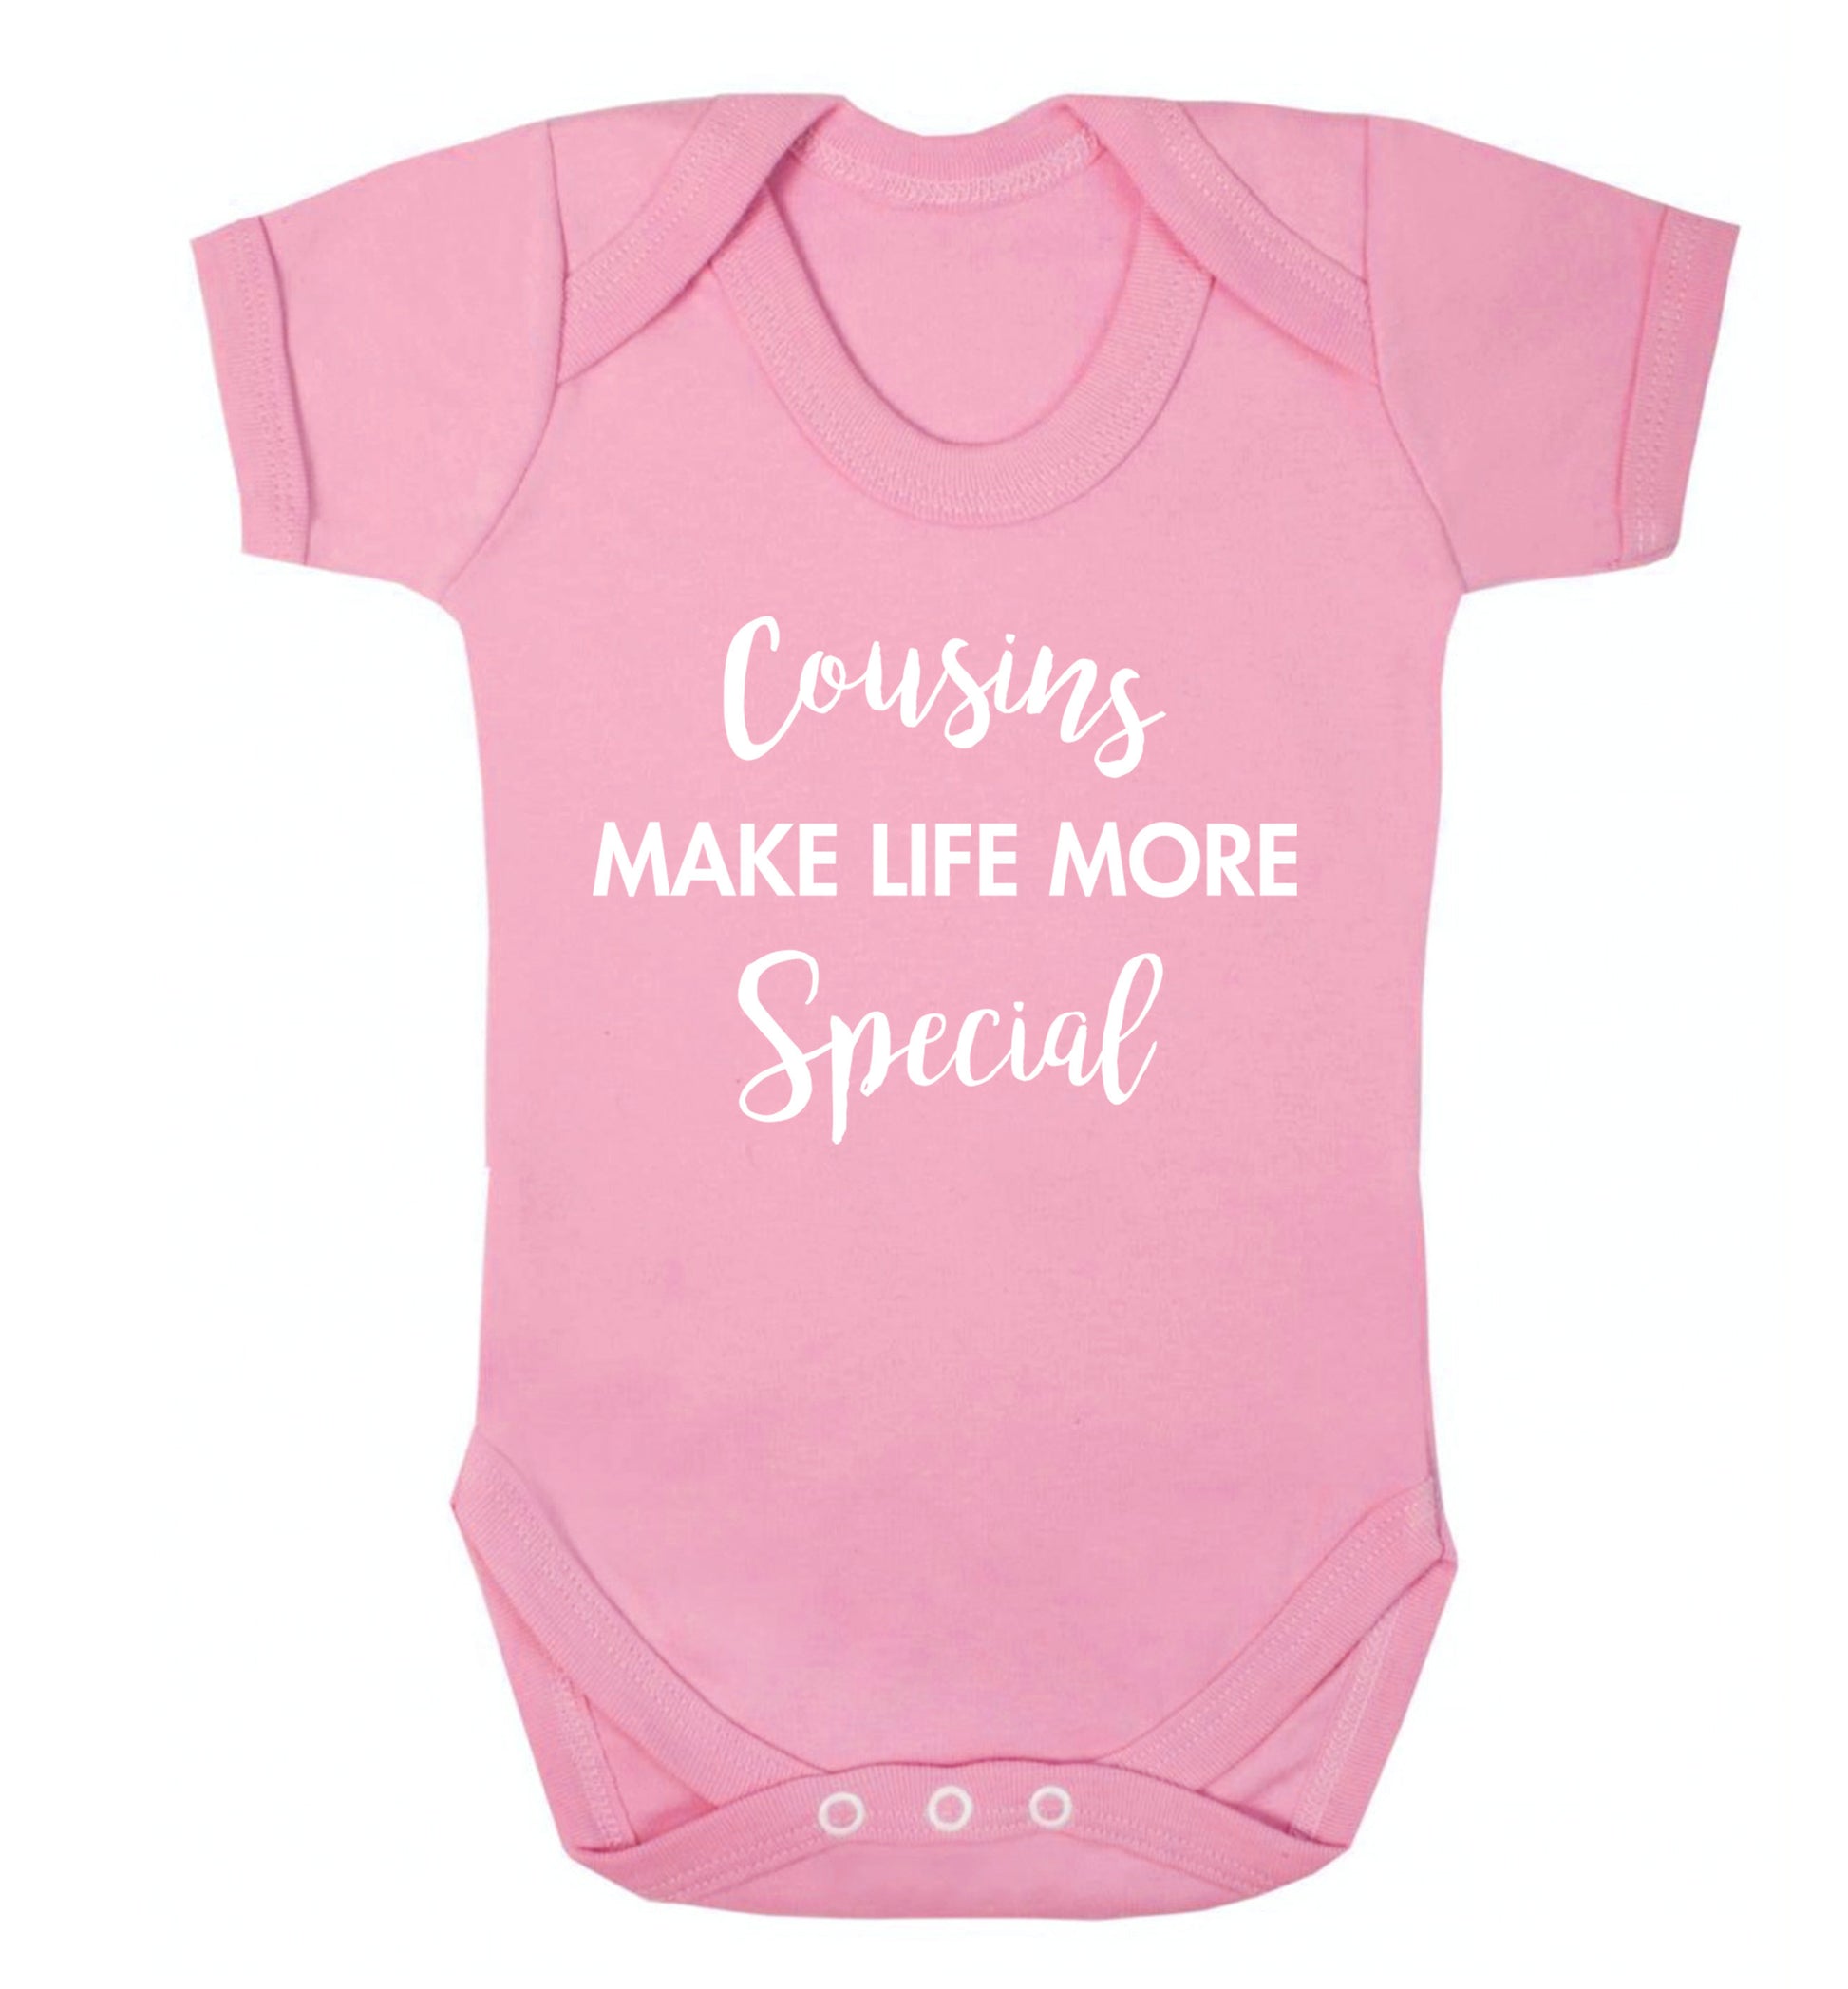 Cousins make life more special Baby Vest pale pink 18-24 months